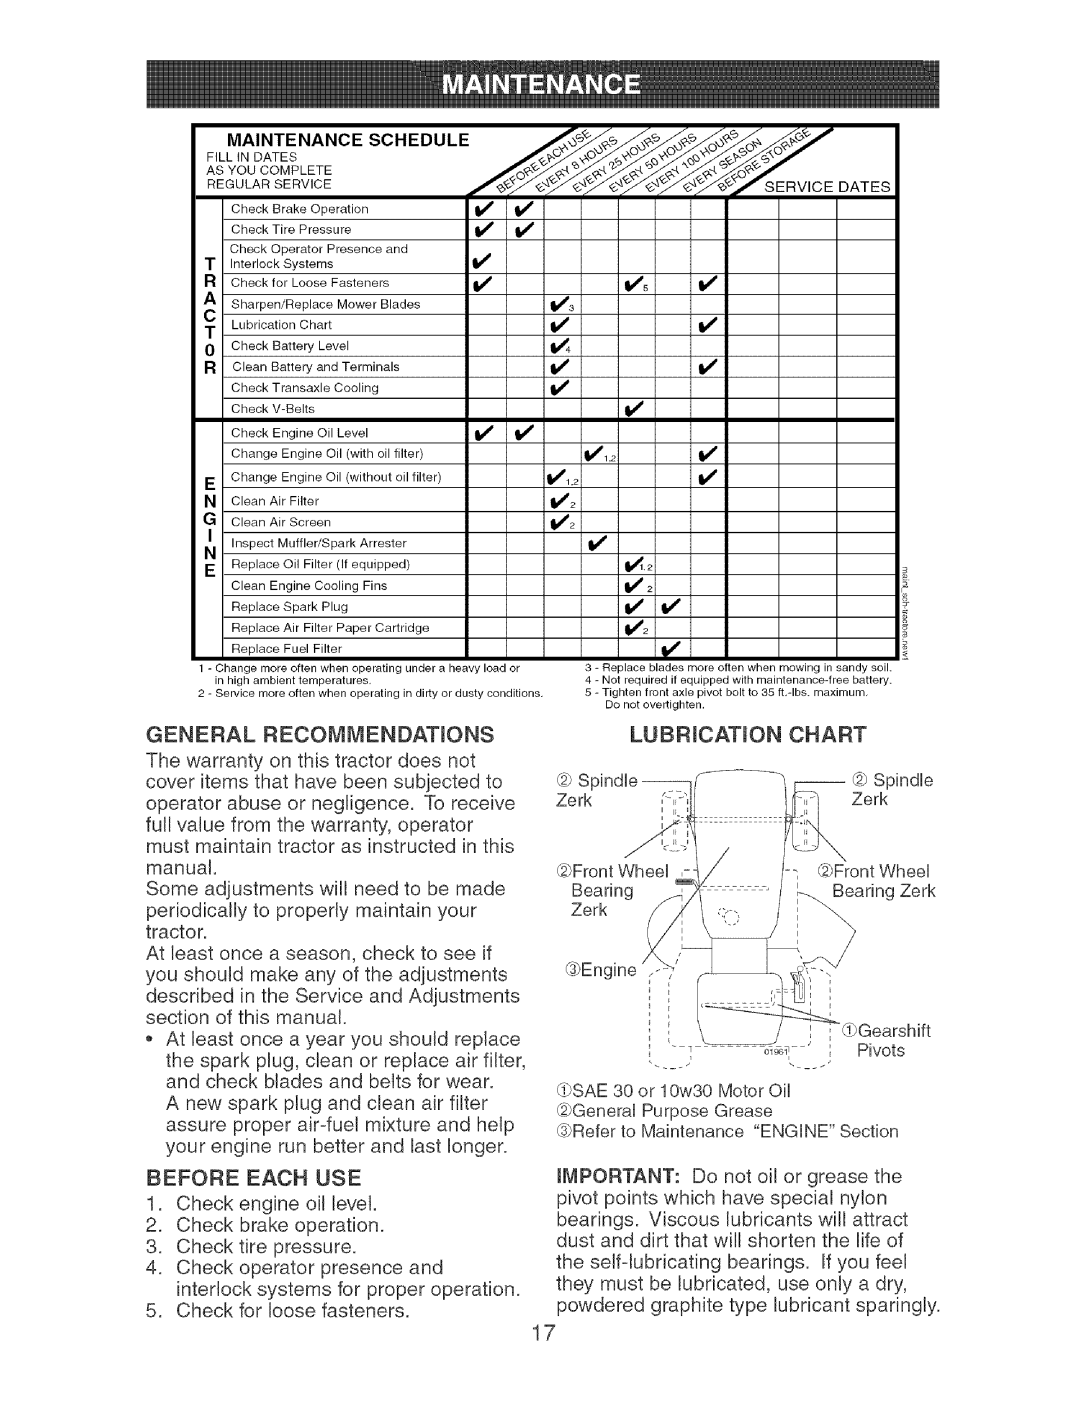 Craftsman 917.273373 owner manual Lubrication, Chart, Before Each Use 